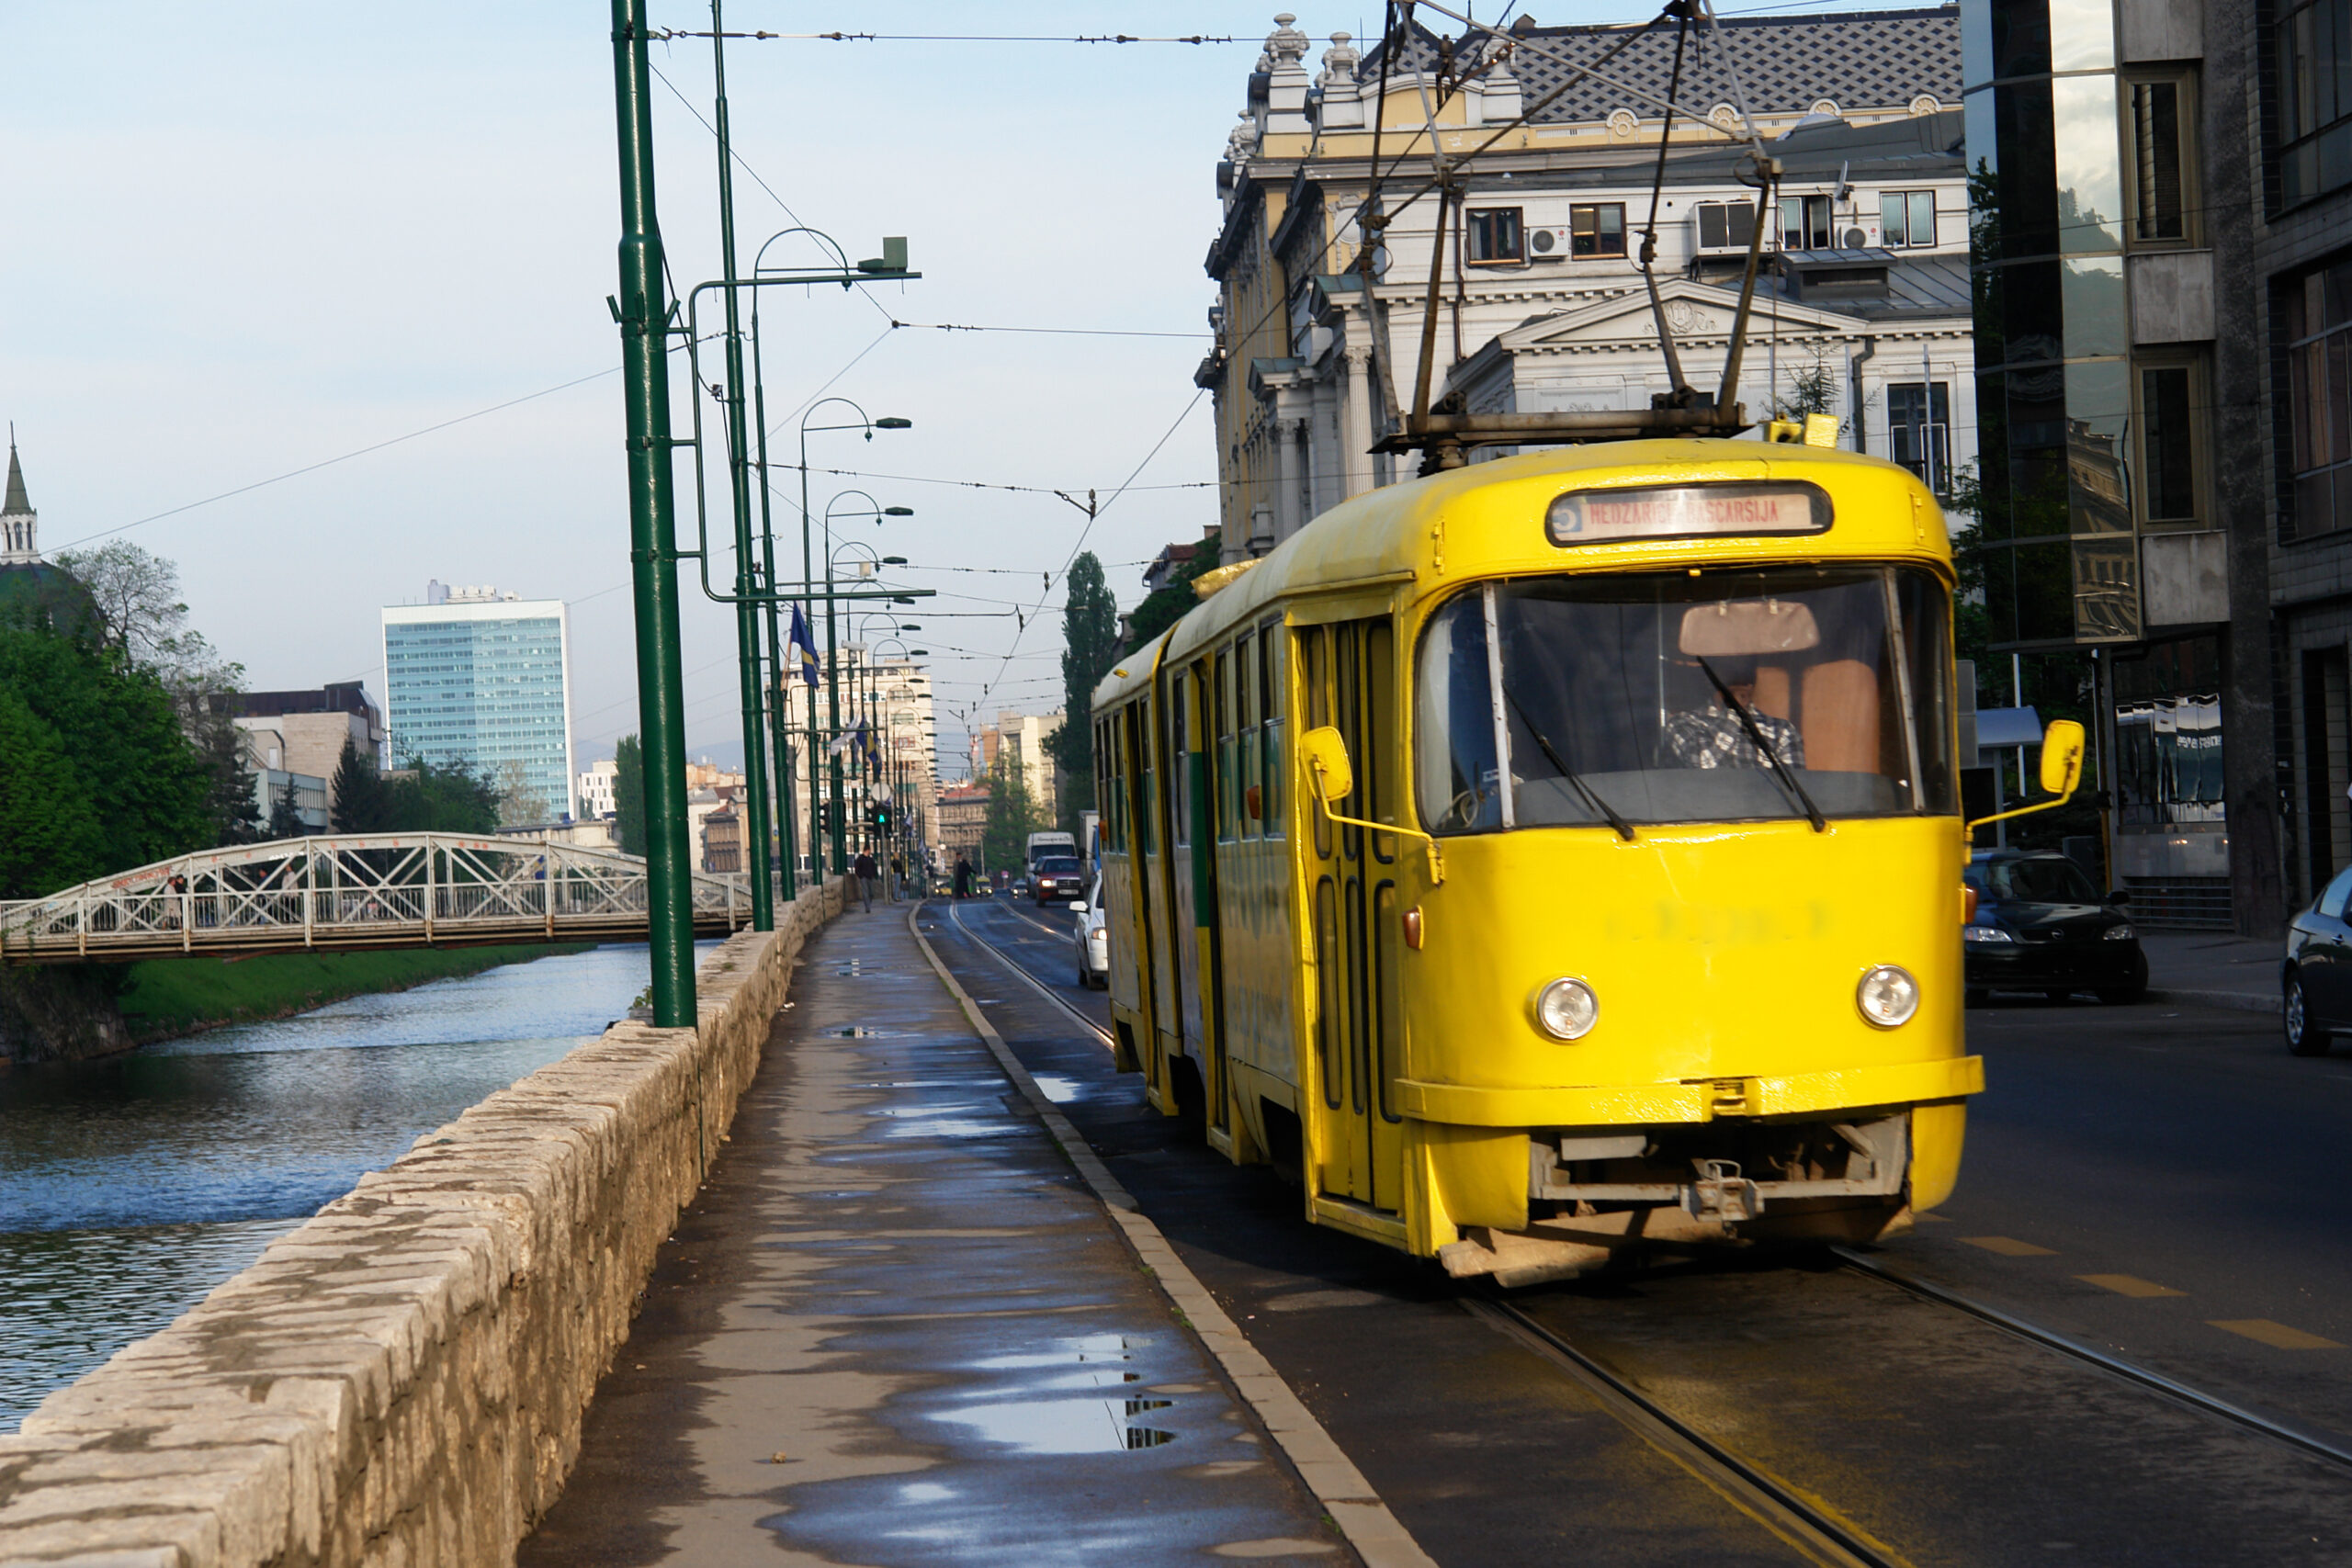 city-scape-along-a-river-with-yellow-traditional-tram